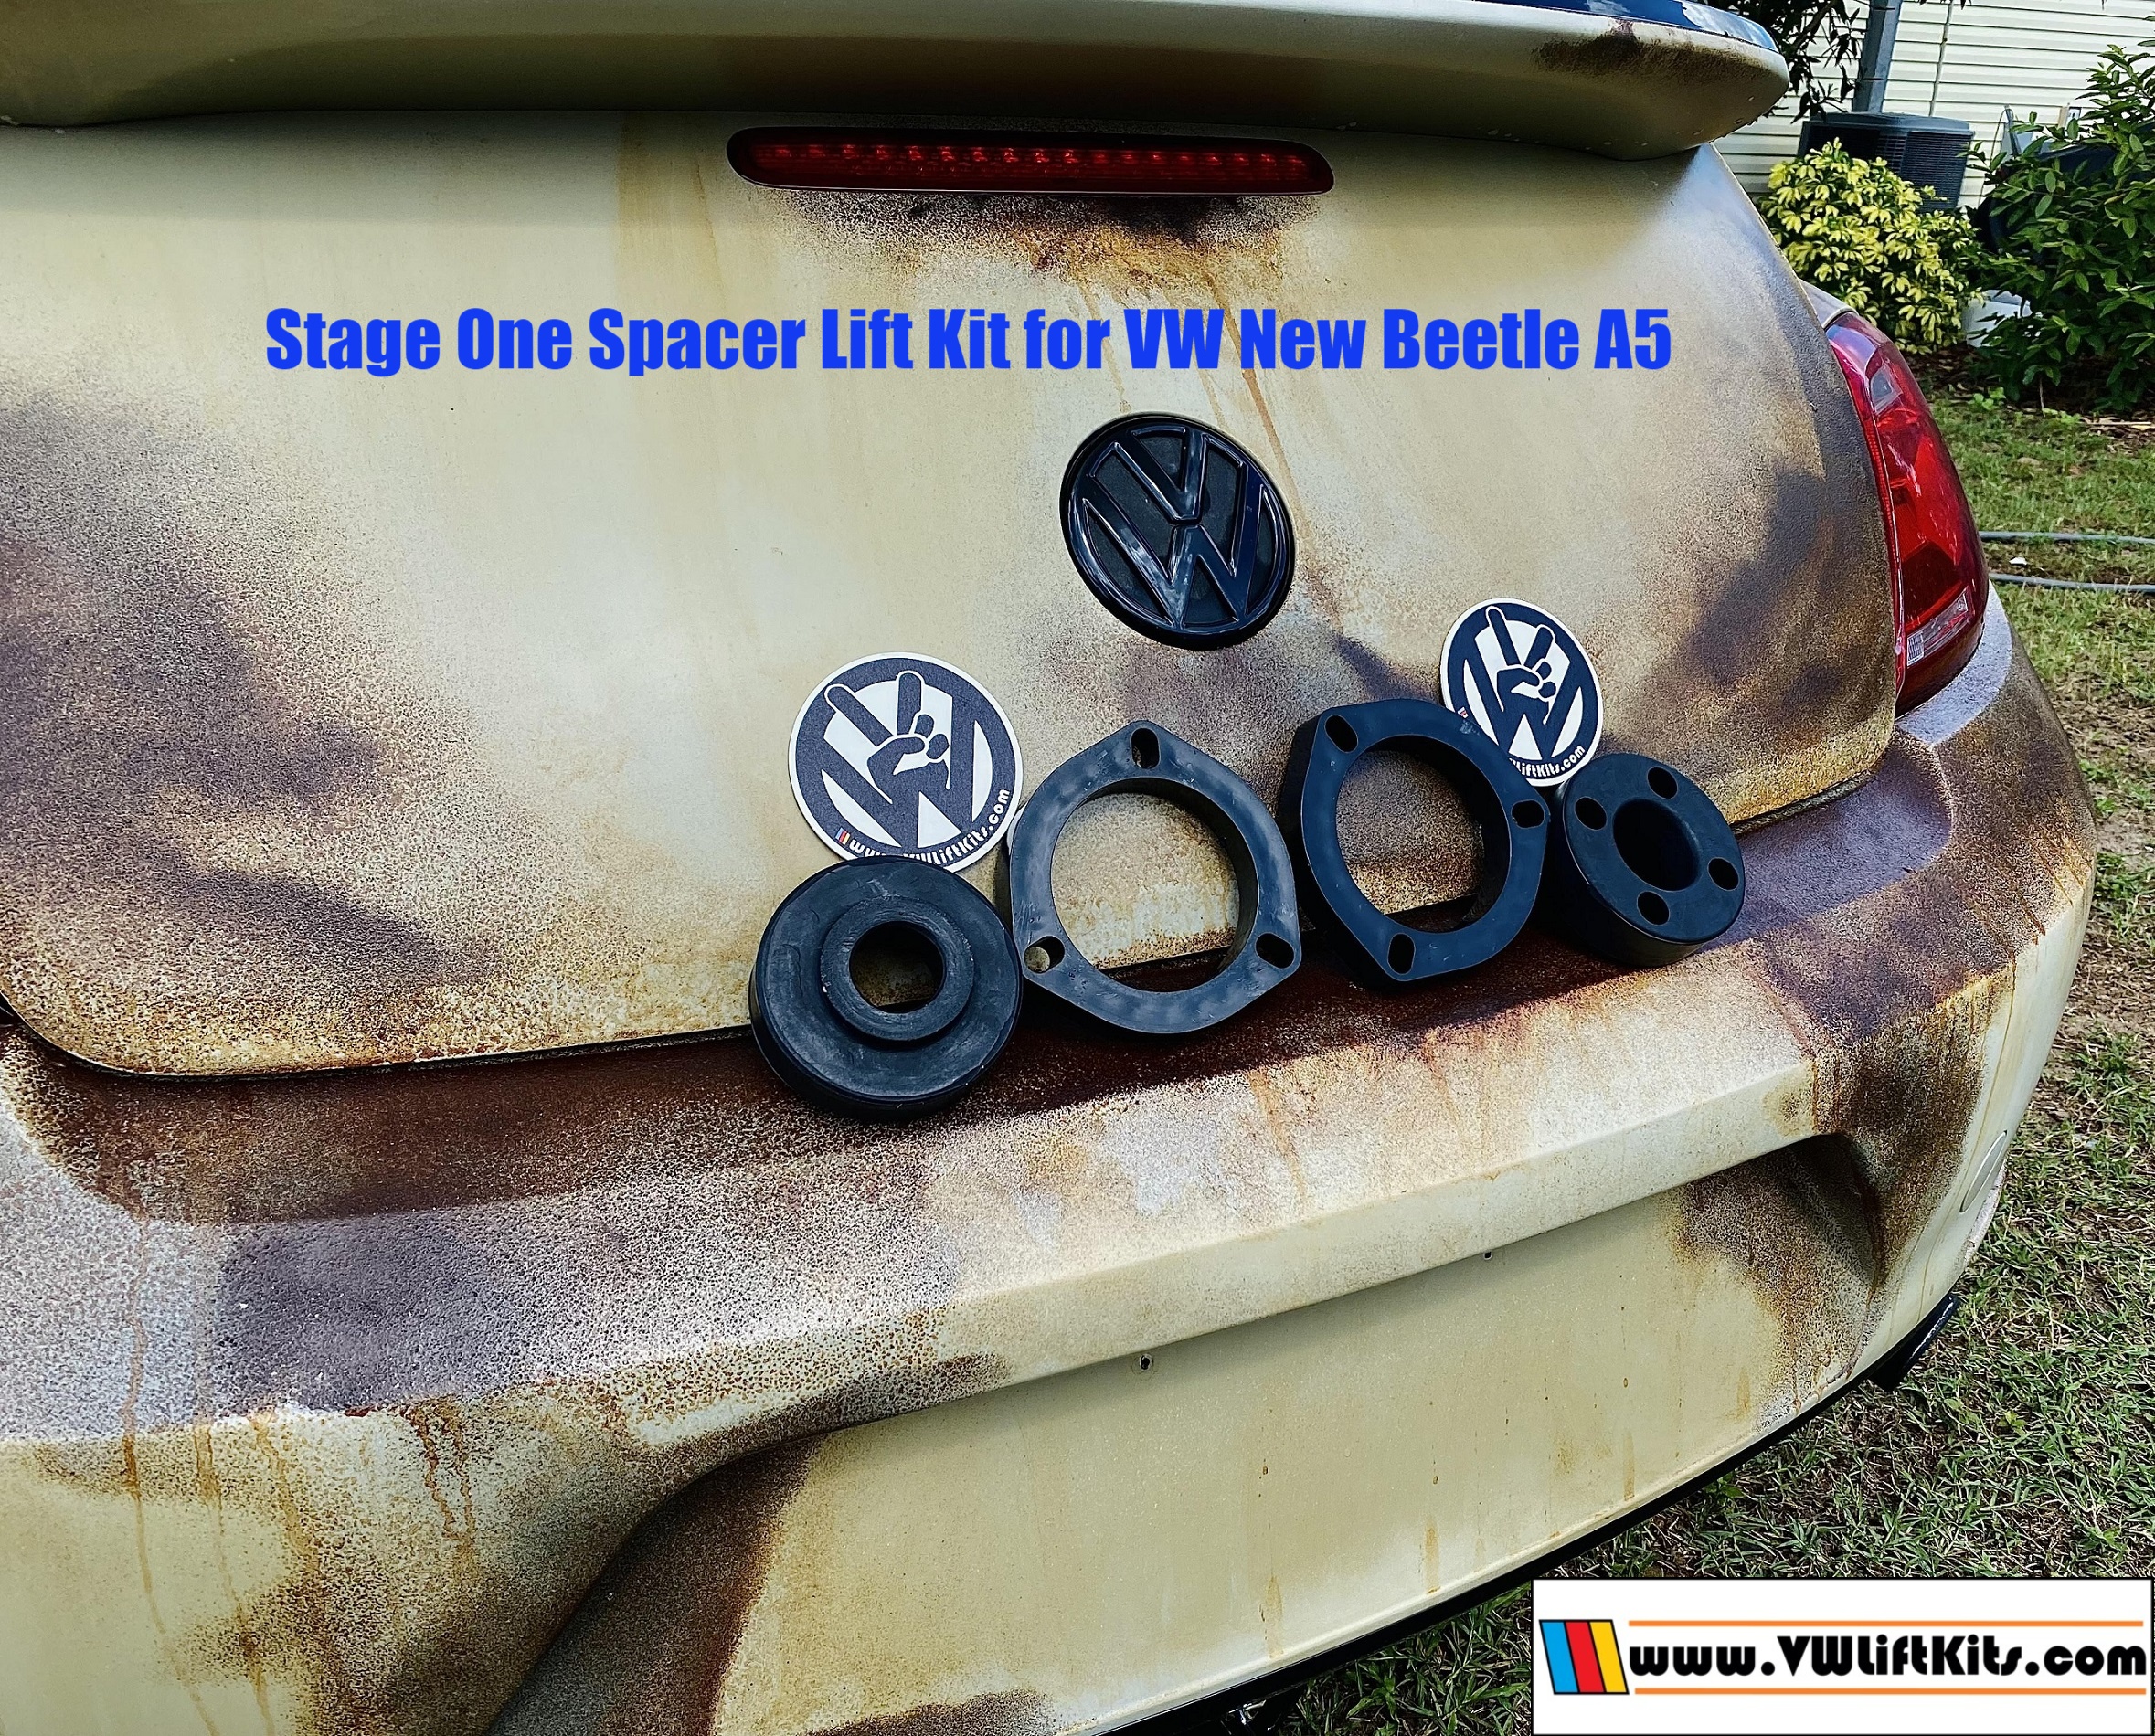 One inch Spacer kit for VW Beetle A5 2011-2019. Best Bolt on VW Beetle A5 Lift Kit, no welding, no cutting, no drilling required.